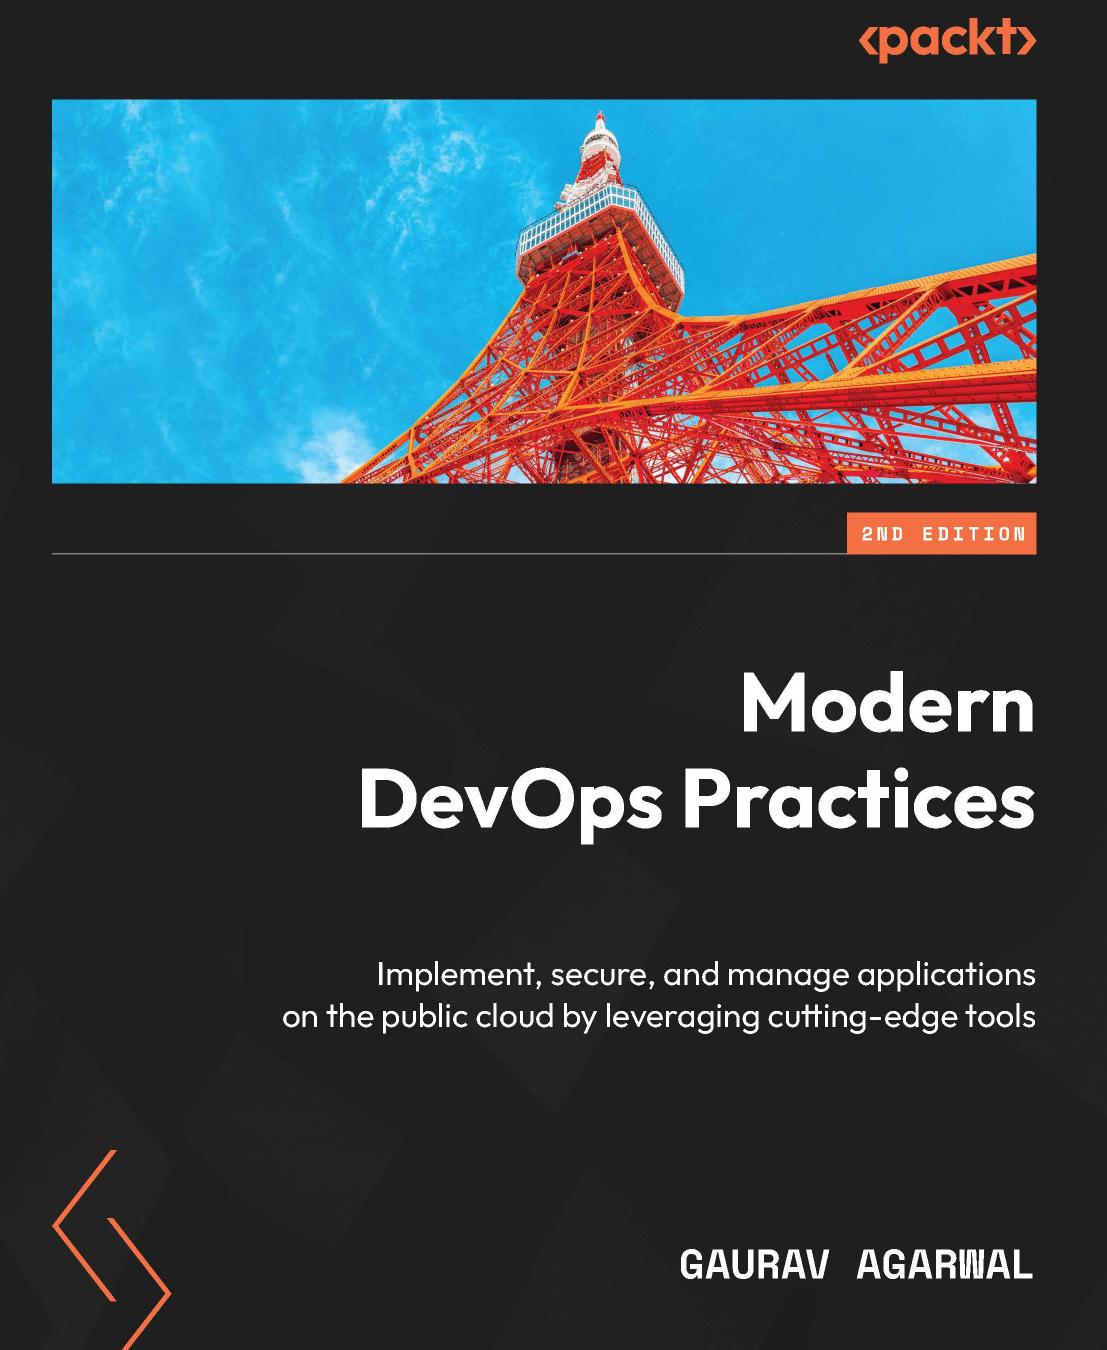 Modern DevOps Practices - Second Edition: Implement, Secure, and Manage Applications on the Public Cloud by Leveraging Cutting-Edge Tools